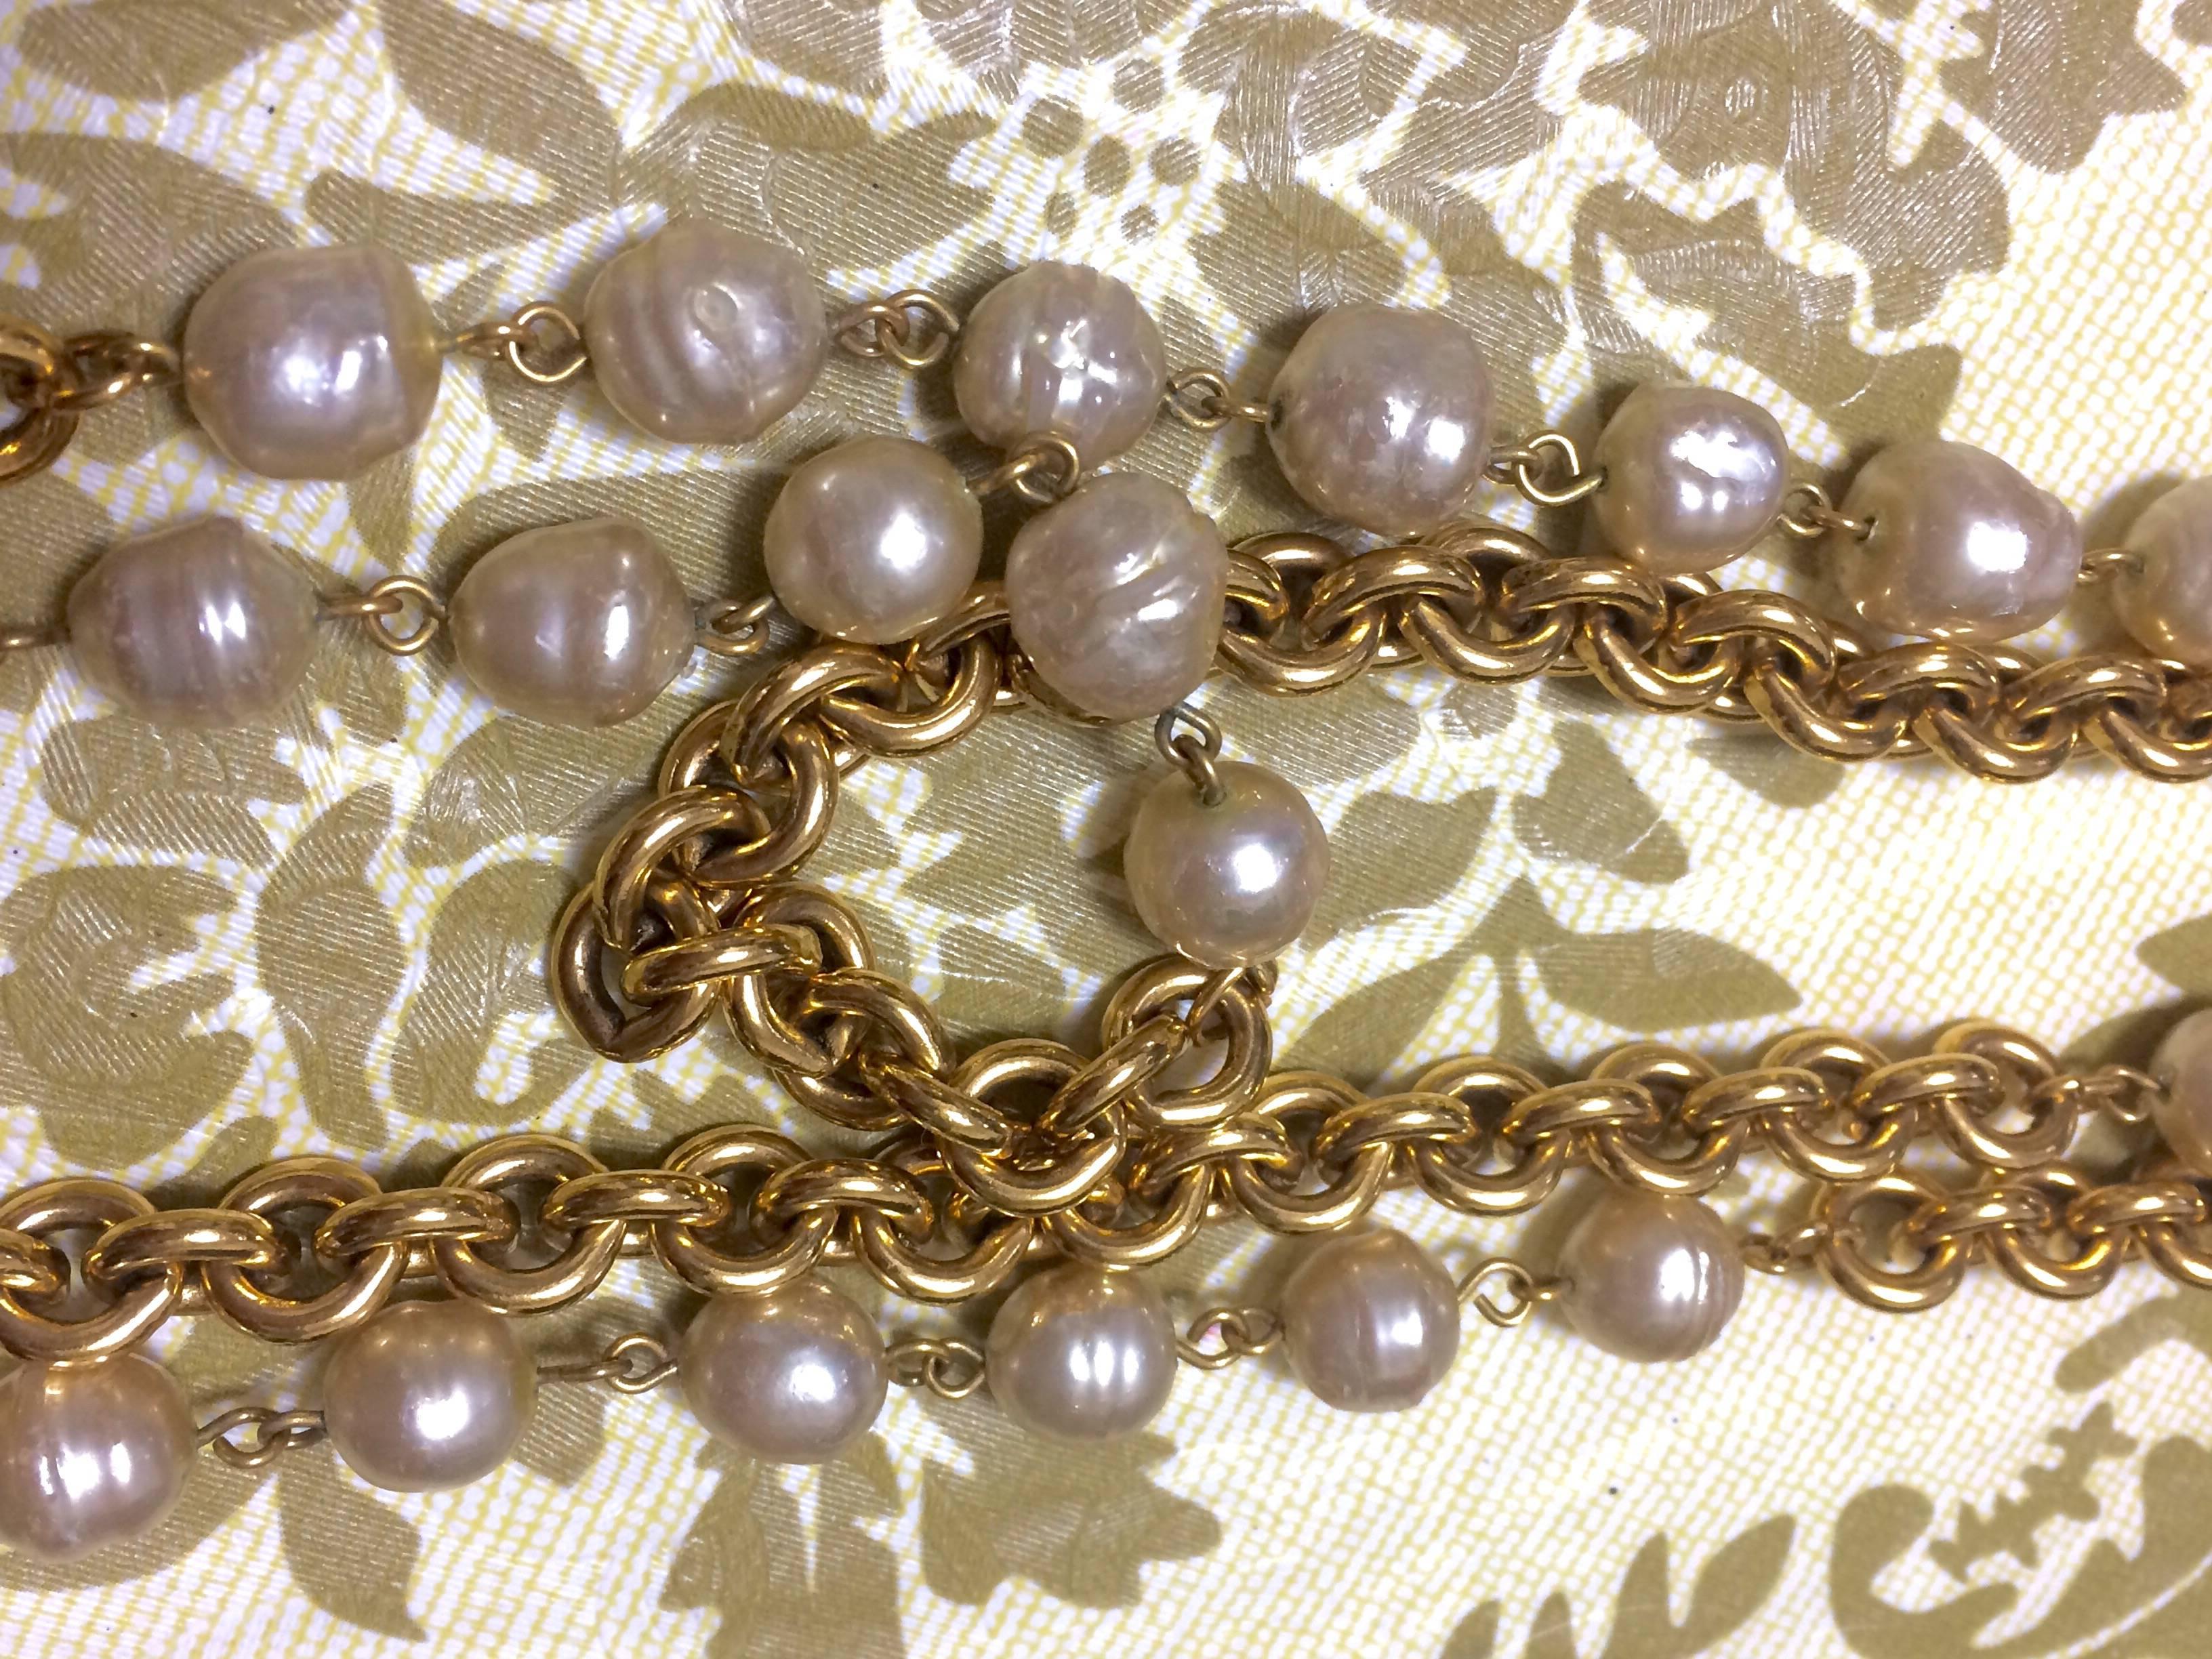  Vintage CHANEL double layer long chain necklace with baroque faux pearls. 2